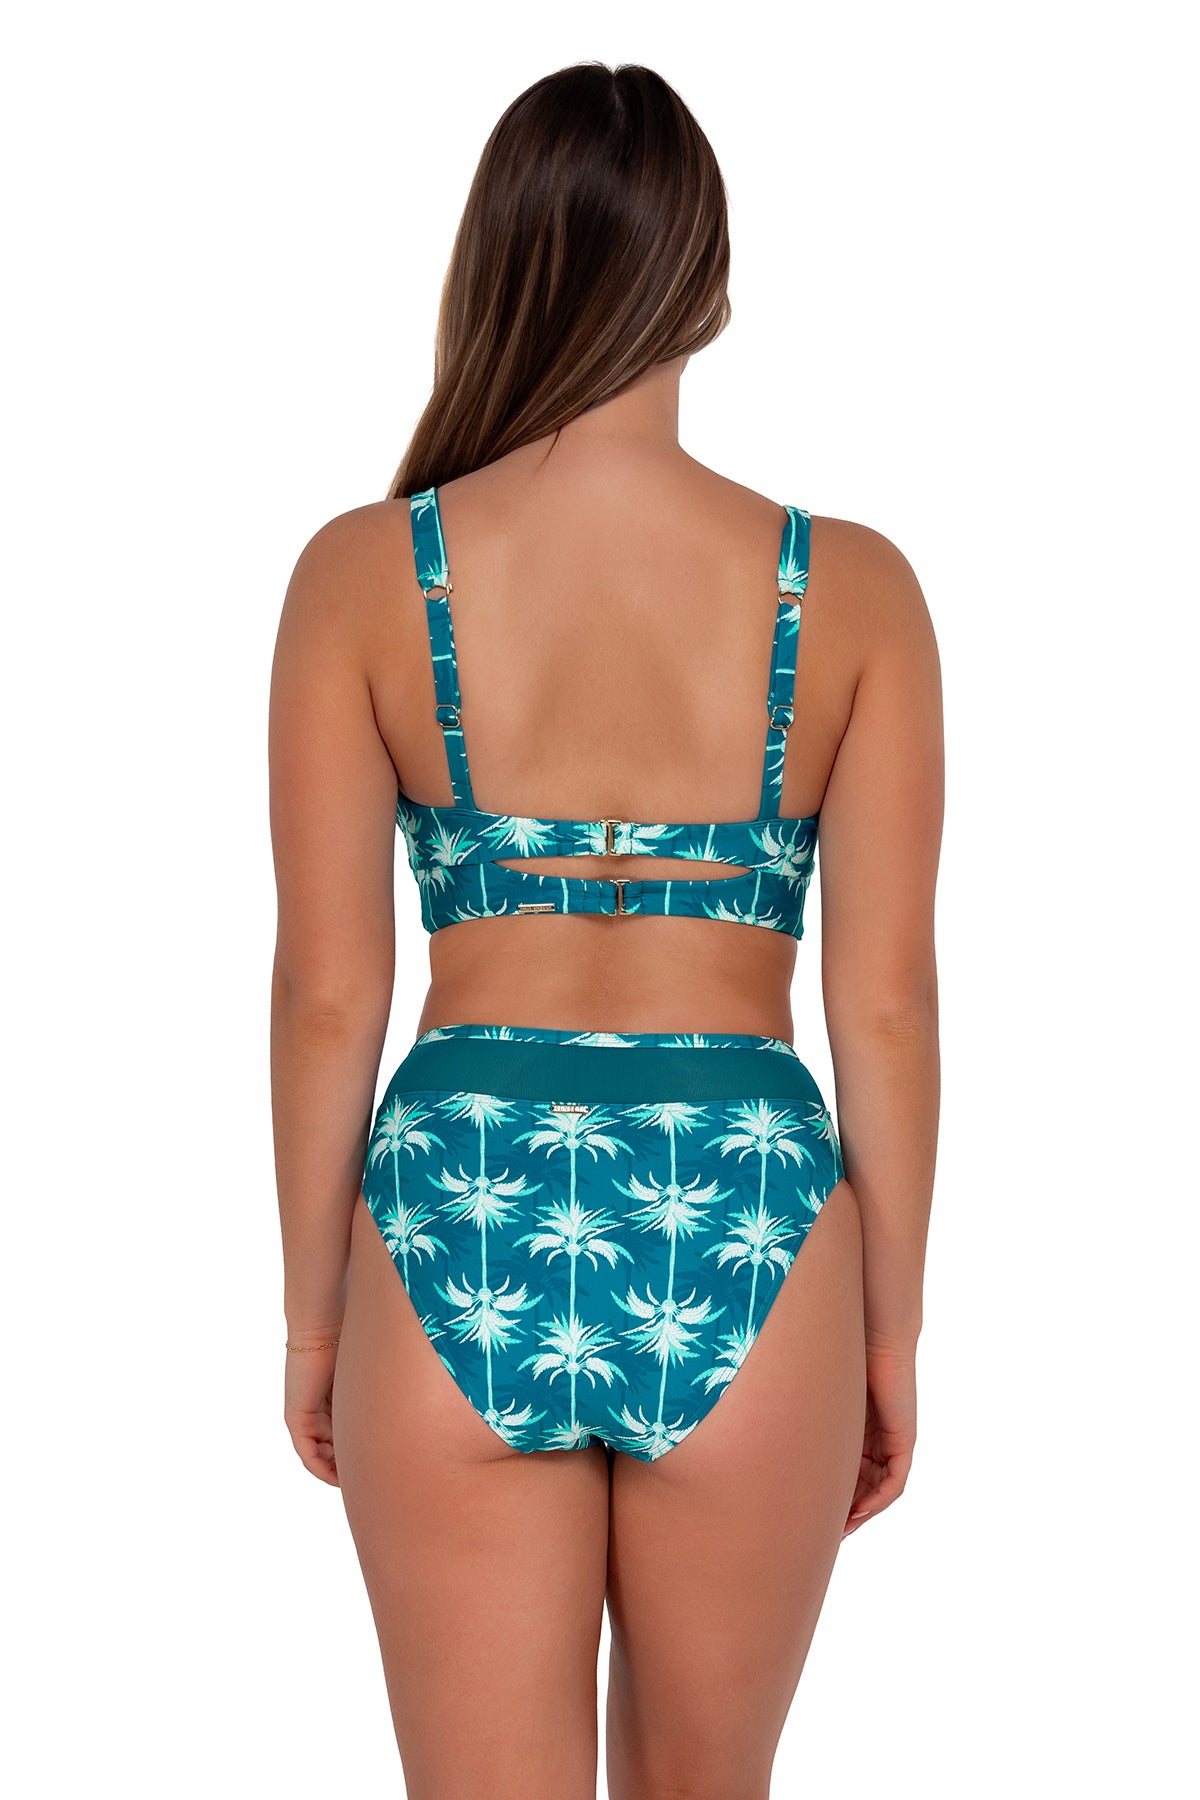 Back pose #1 of Taylor wearing Sunsets Palm Beach Annie High Waist Bottom paired with Danica Top bikini